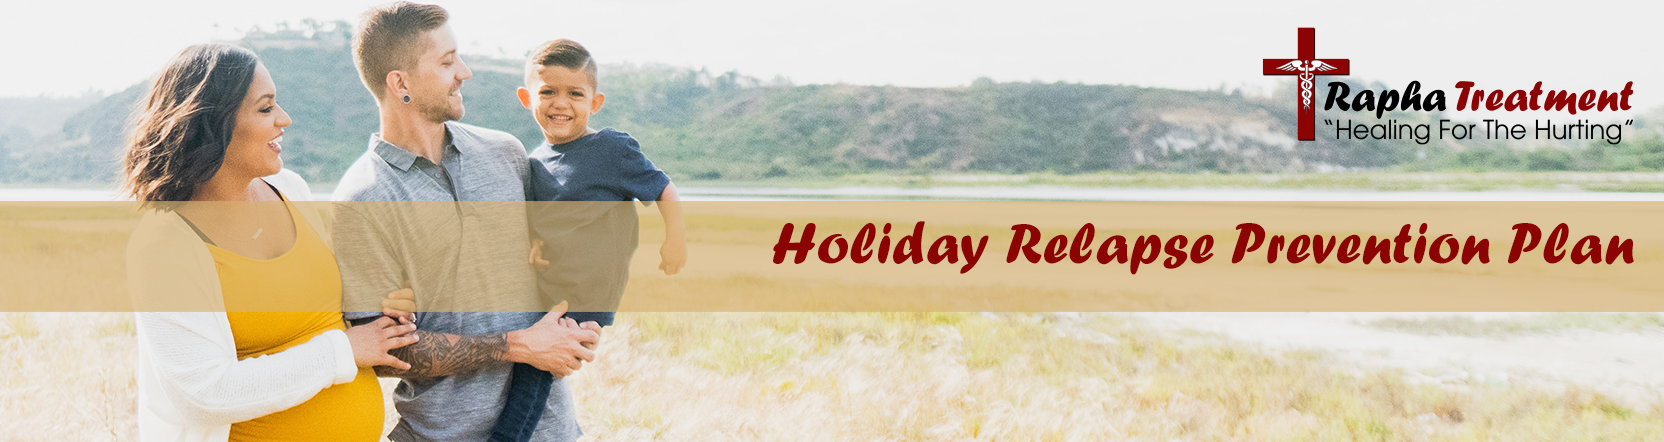 Holiday Relapse Prevention Plan